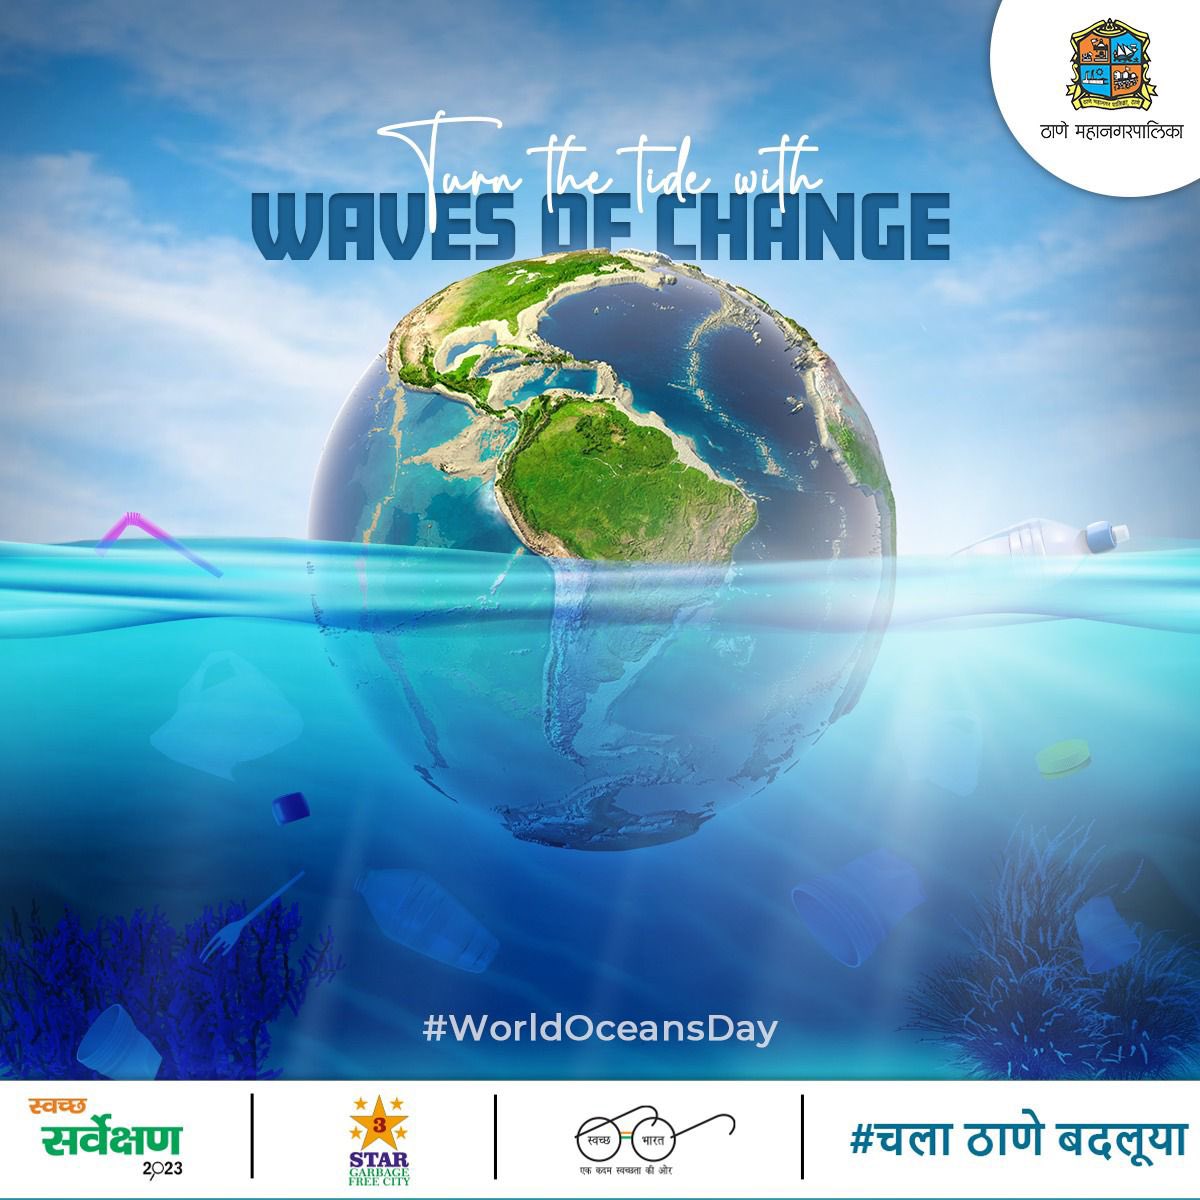 Ocean pollution - there's no tip of the iceberg, in this case, the whole iceberg is the problem🌍🌊
#worldoceansday #Oceansday #Ocean #Thane #Thanecity 
#SwachhSurvekshan2023 #SwachhataKeDoRang #MyCityMyPride #YehMeraSheharHai #IndiavsGarbage